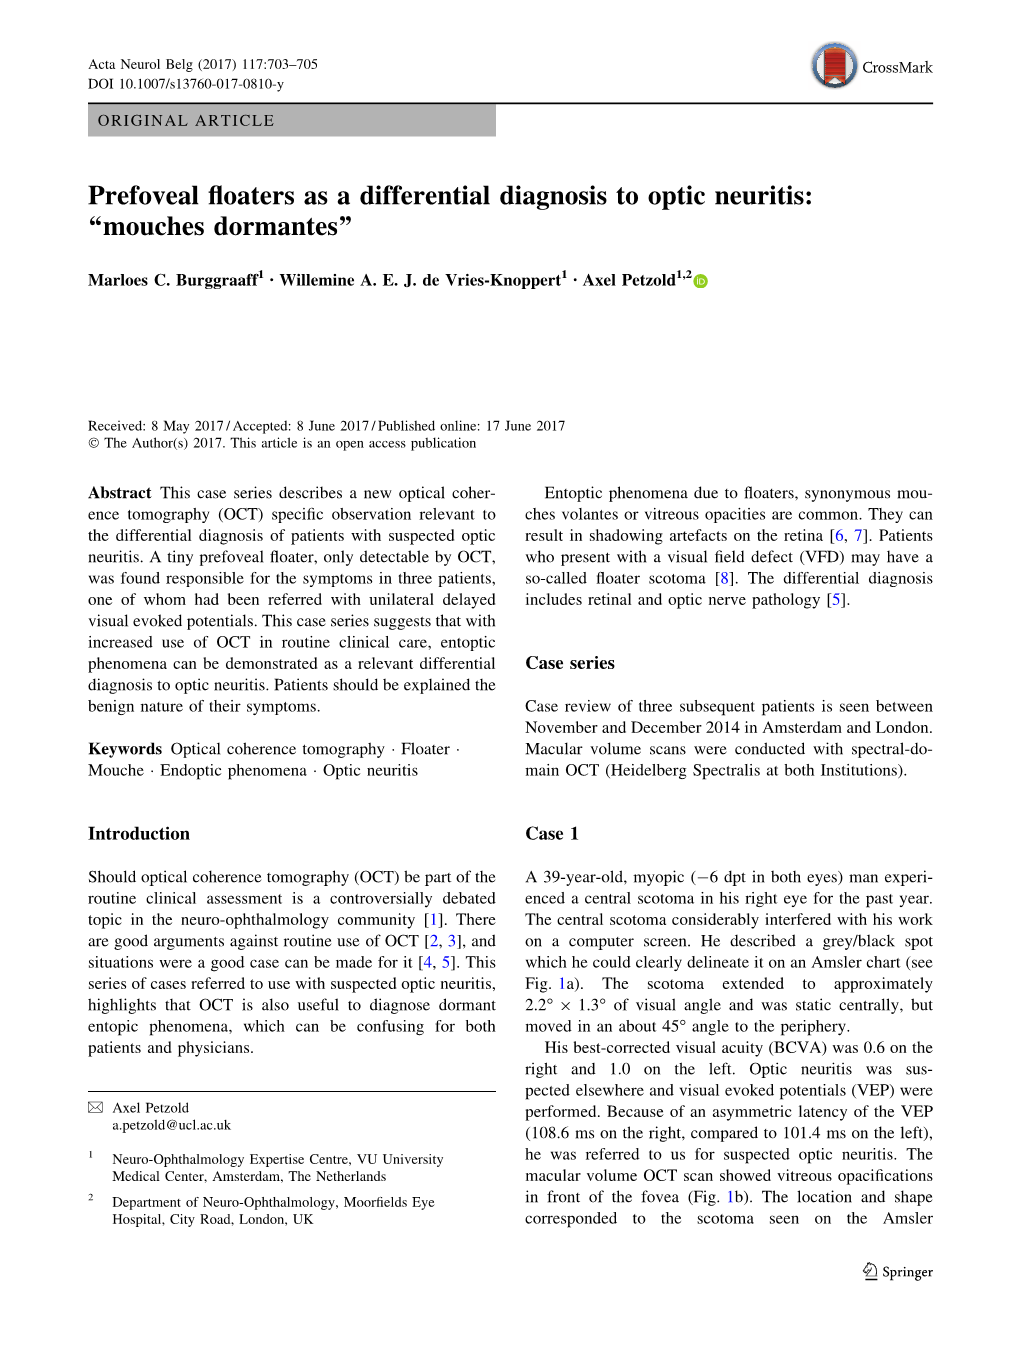 Prefoveal Floaters As a Differential Diagnosis to Optic Neuritis